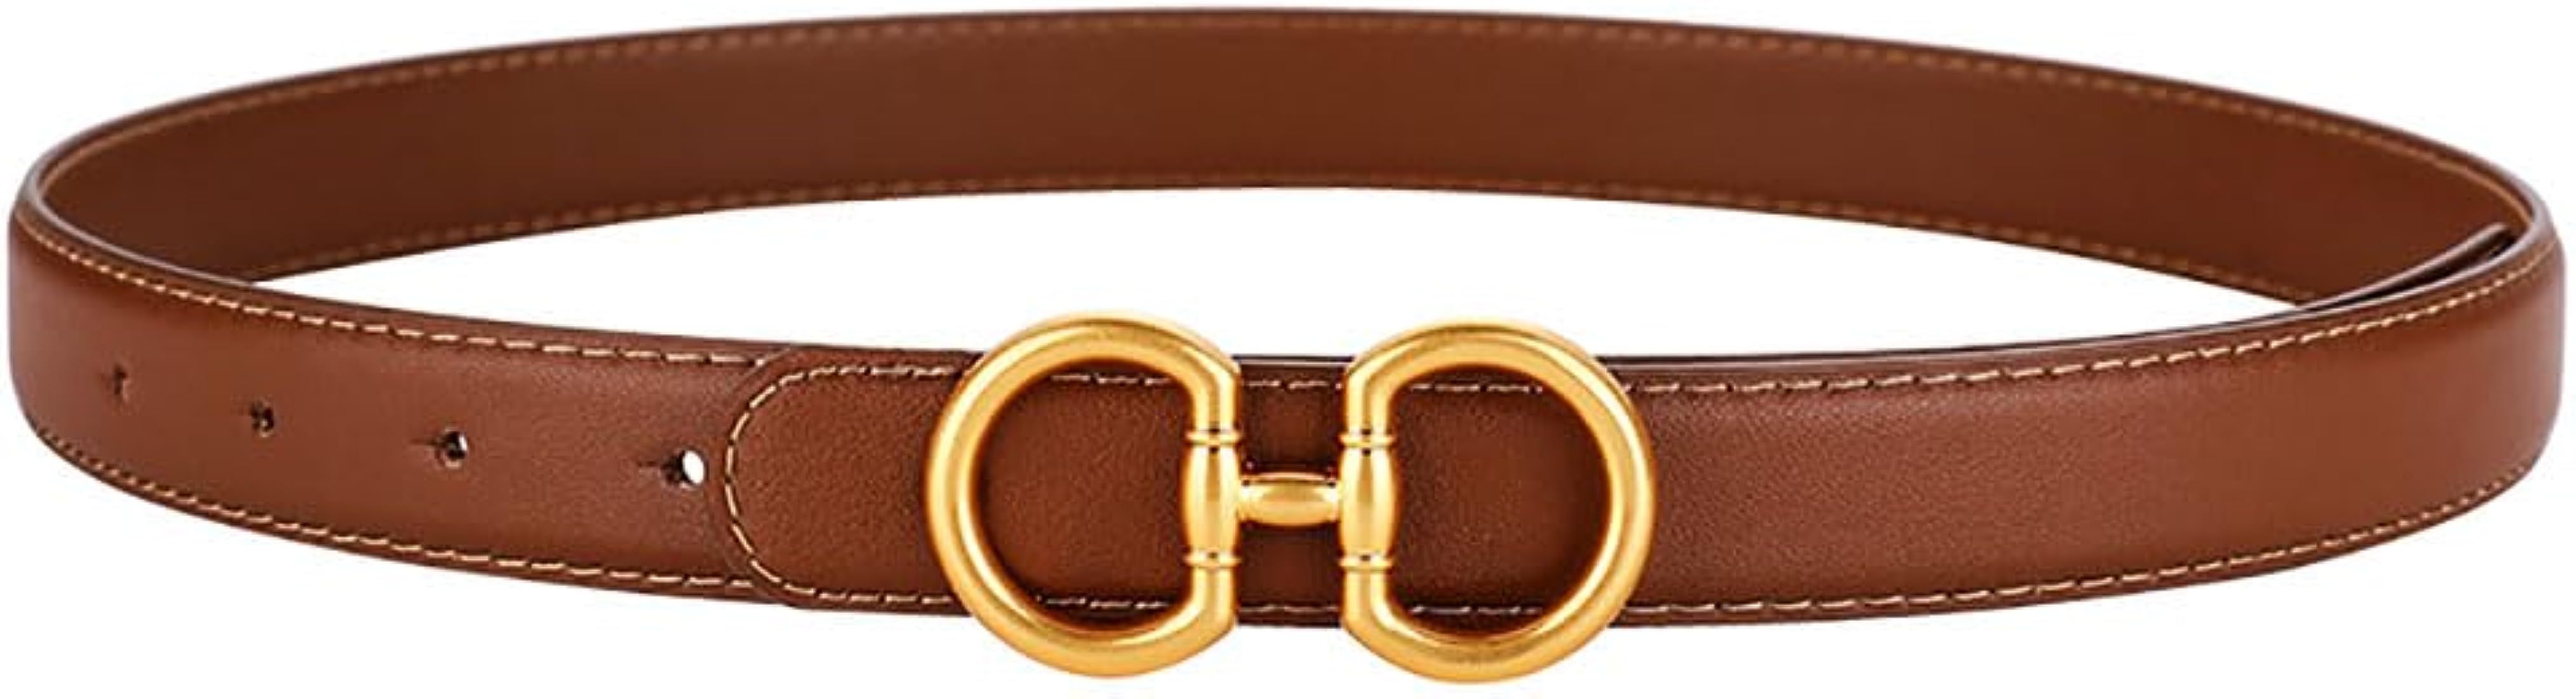 FOMCORT Women Leather Belt for Dresses, Classic Buckle Design Jeans Belt for Pants in Gold Buckle Be | Amazon (US)